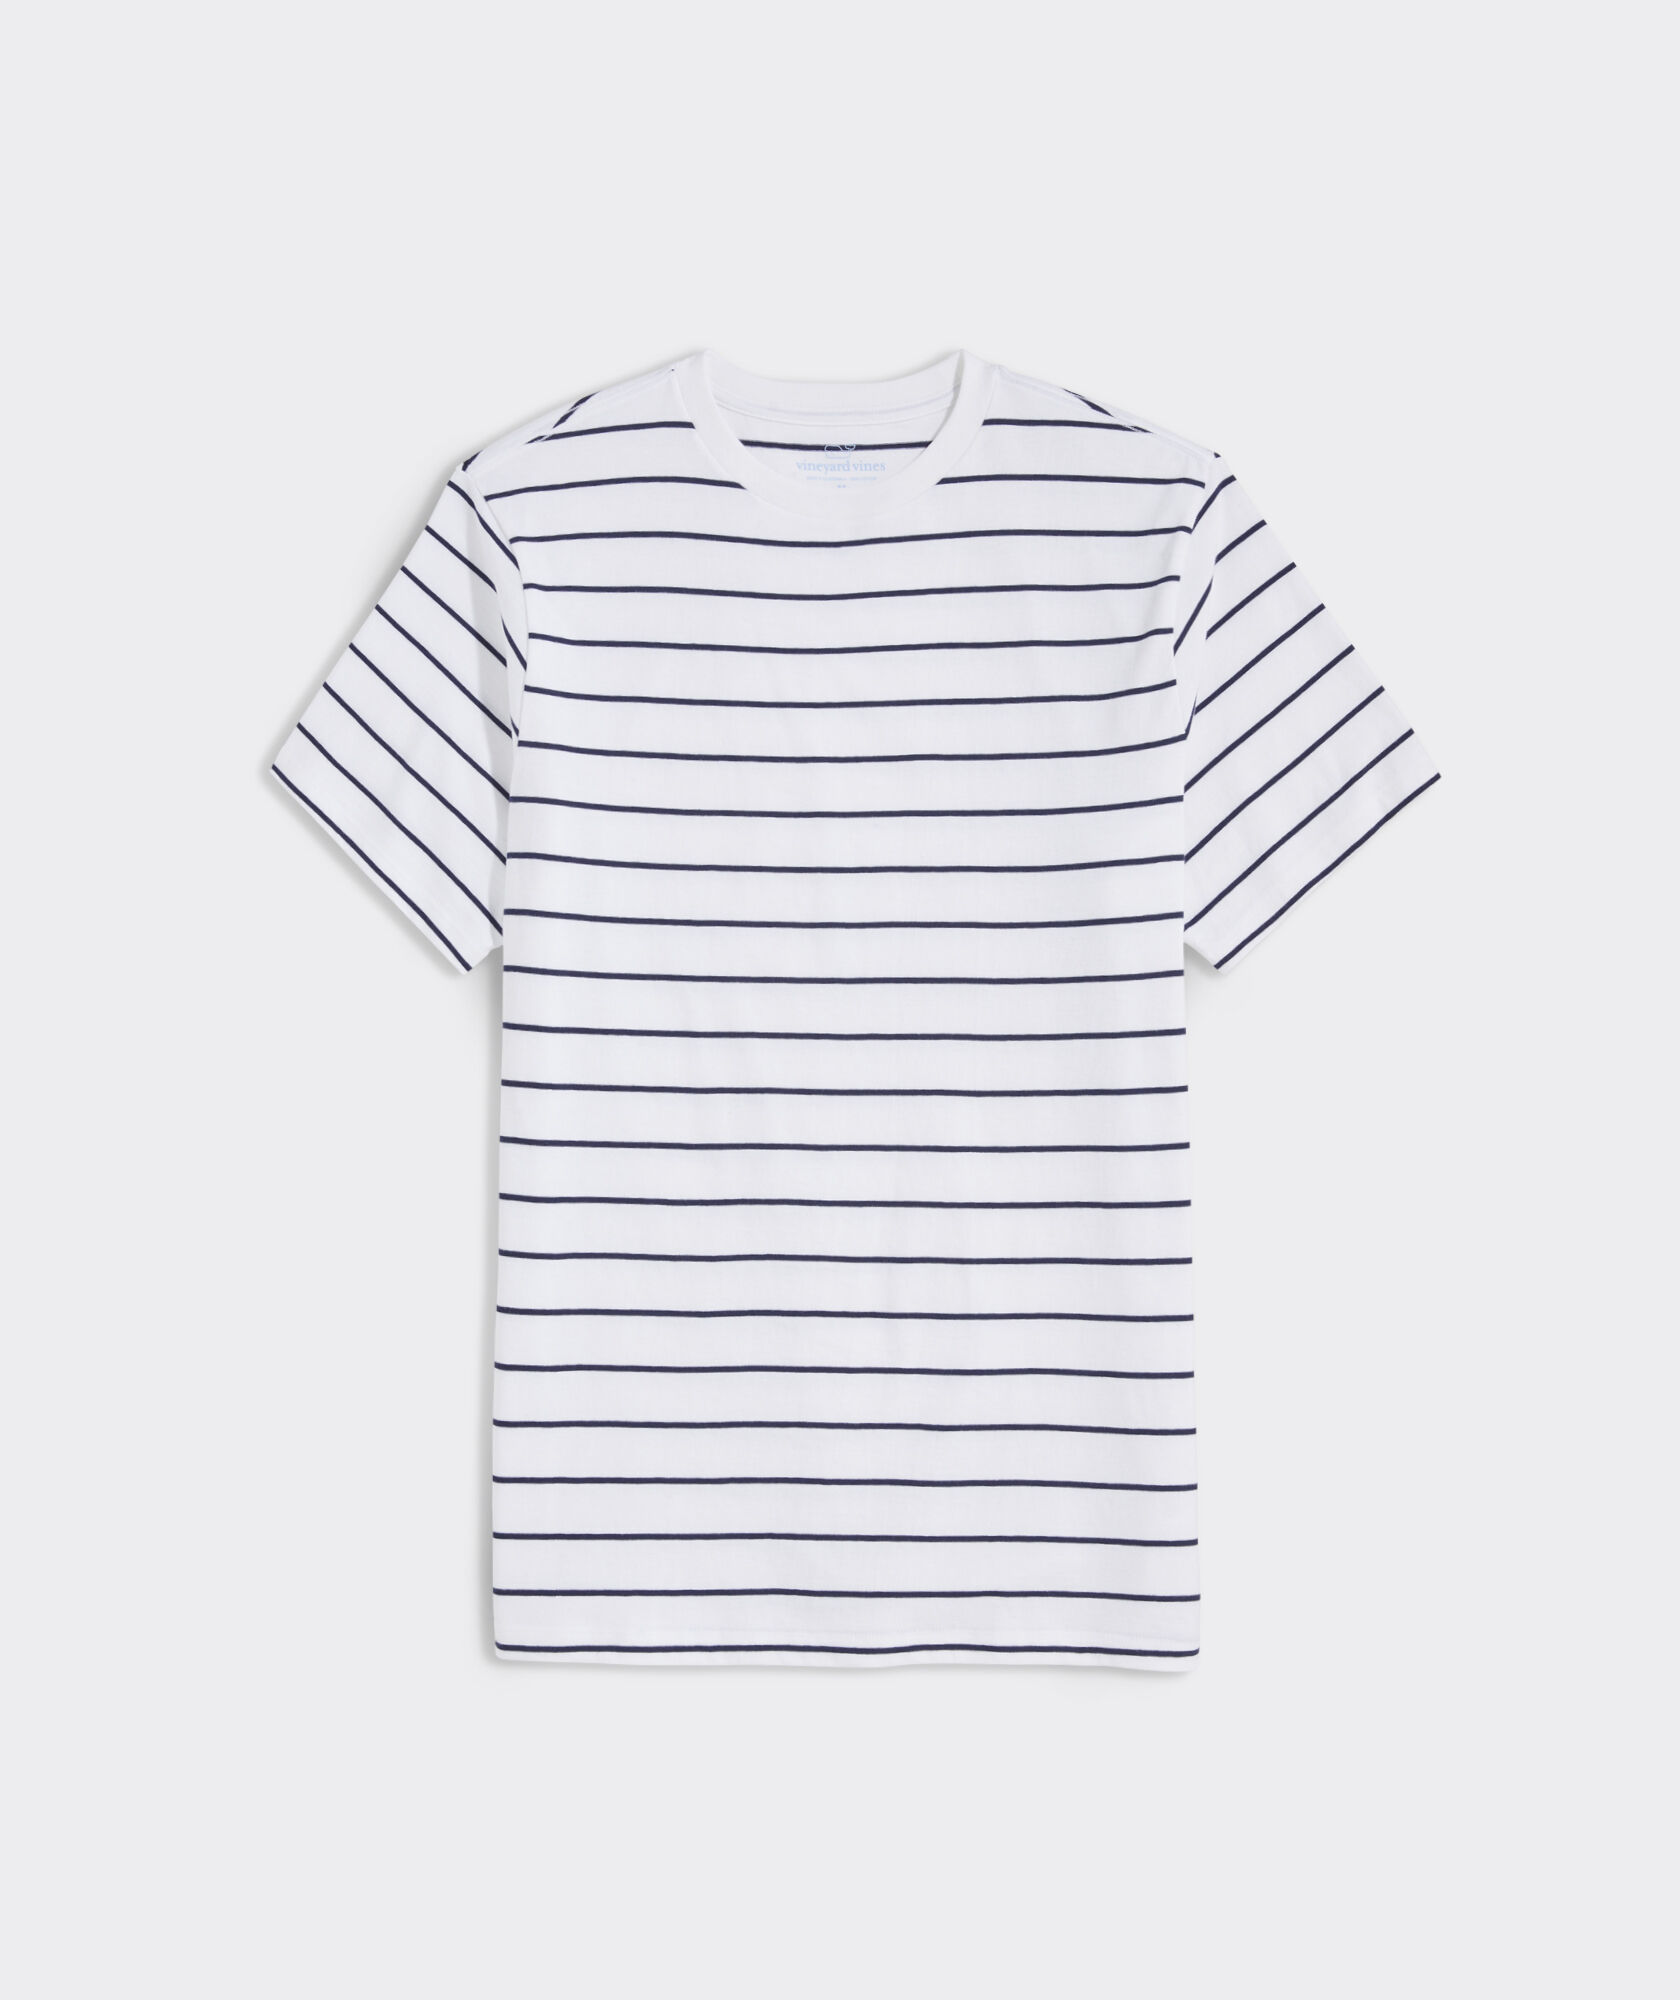 Foredeck Striped Short-Sleeve Tee